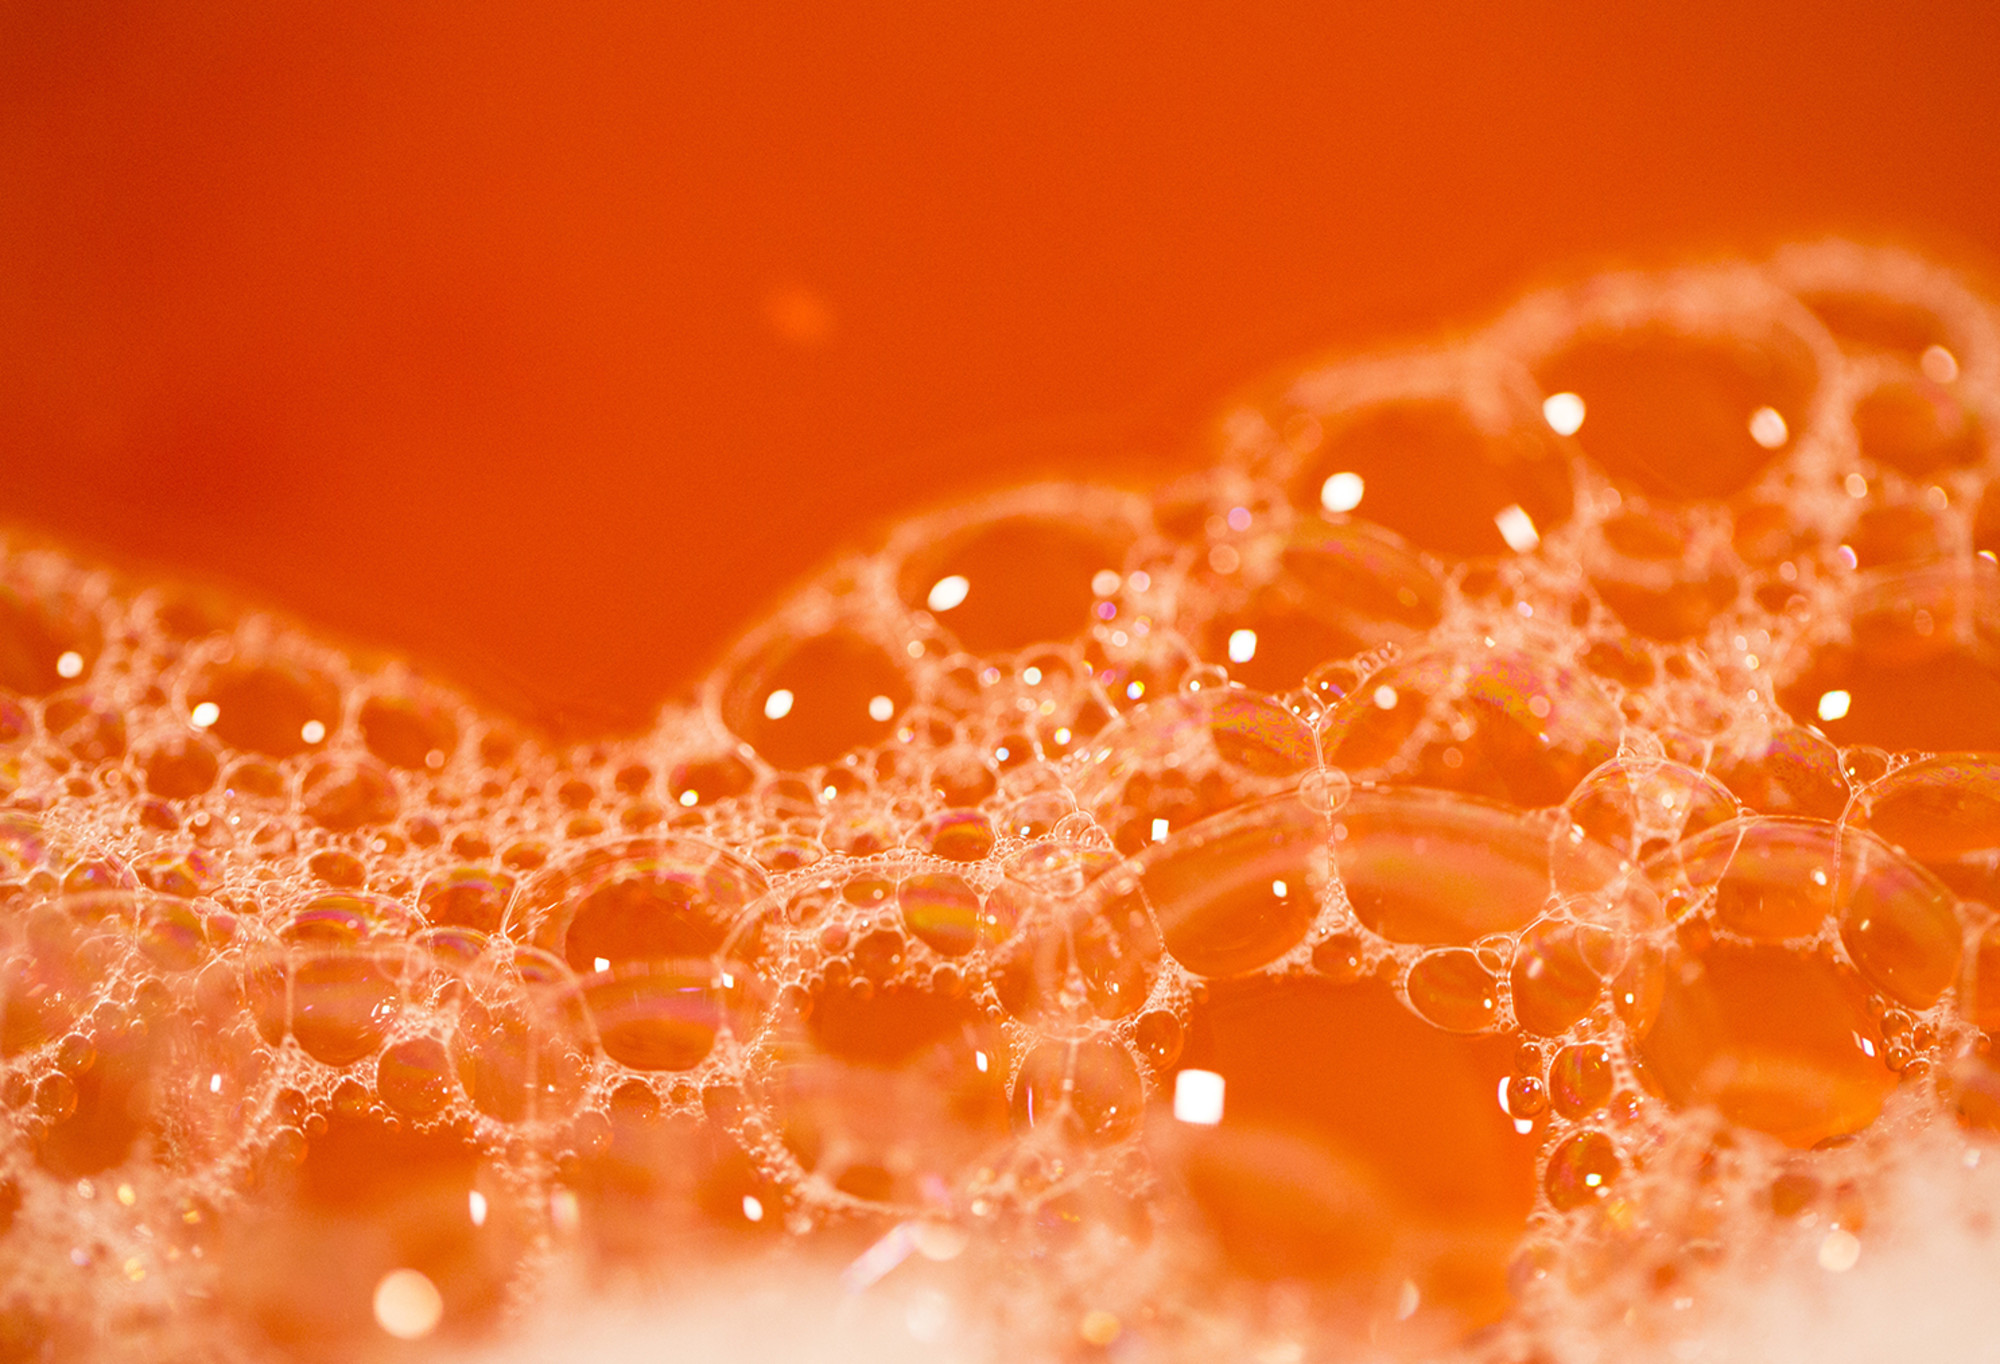 A ground level, close-up shot of huge, transparent bubbles, sitting in bright orange water.